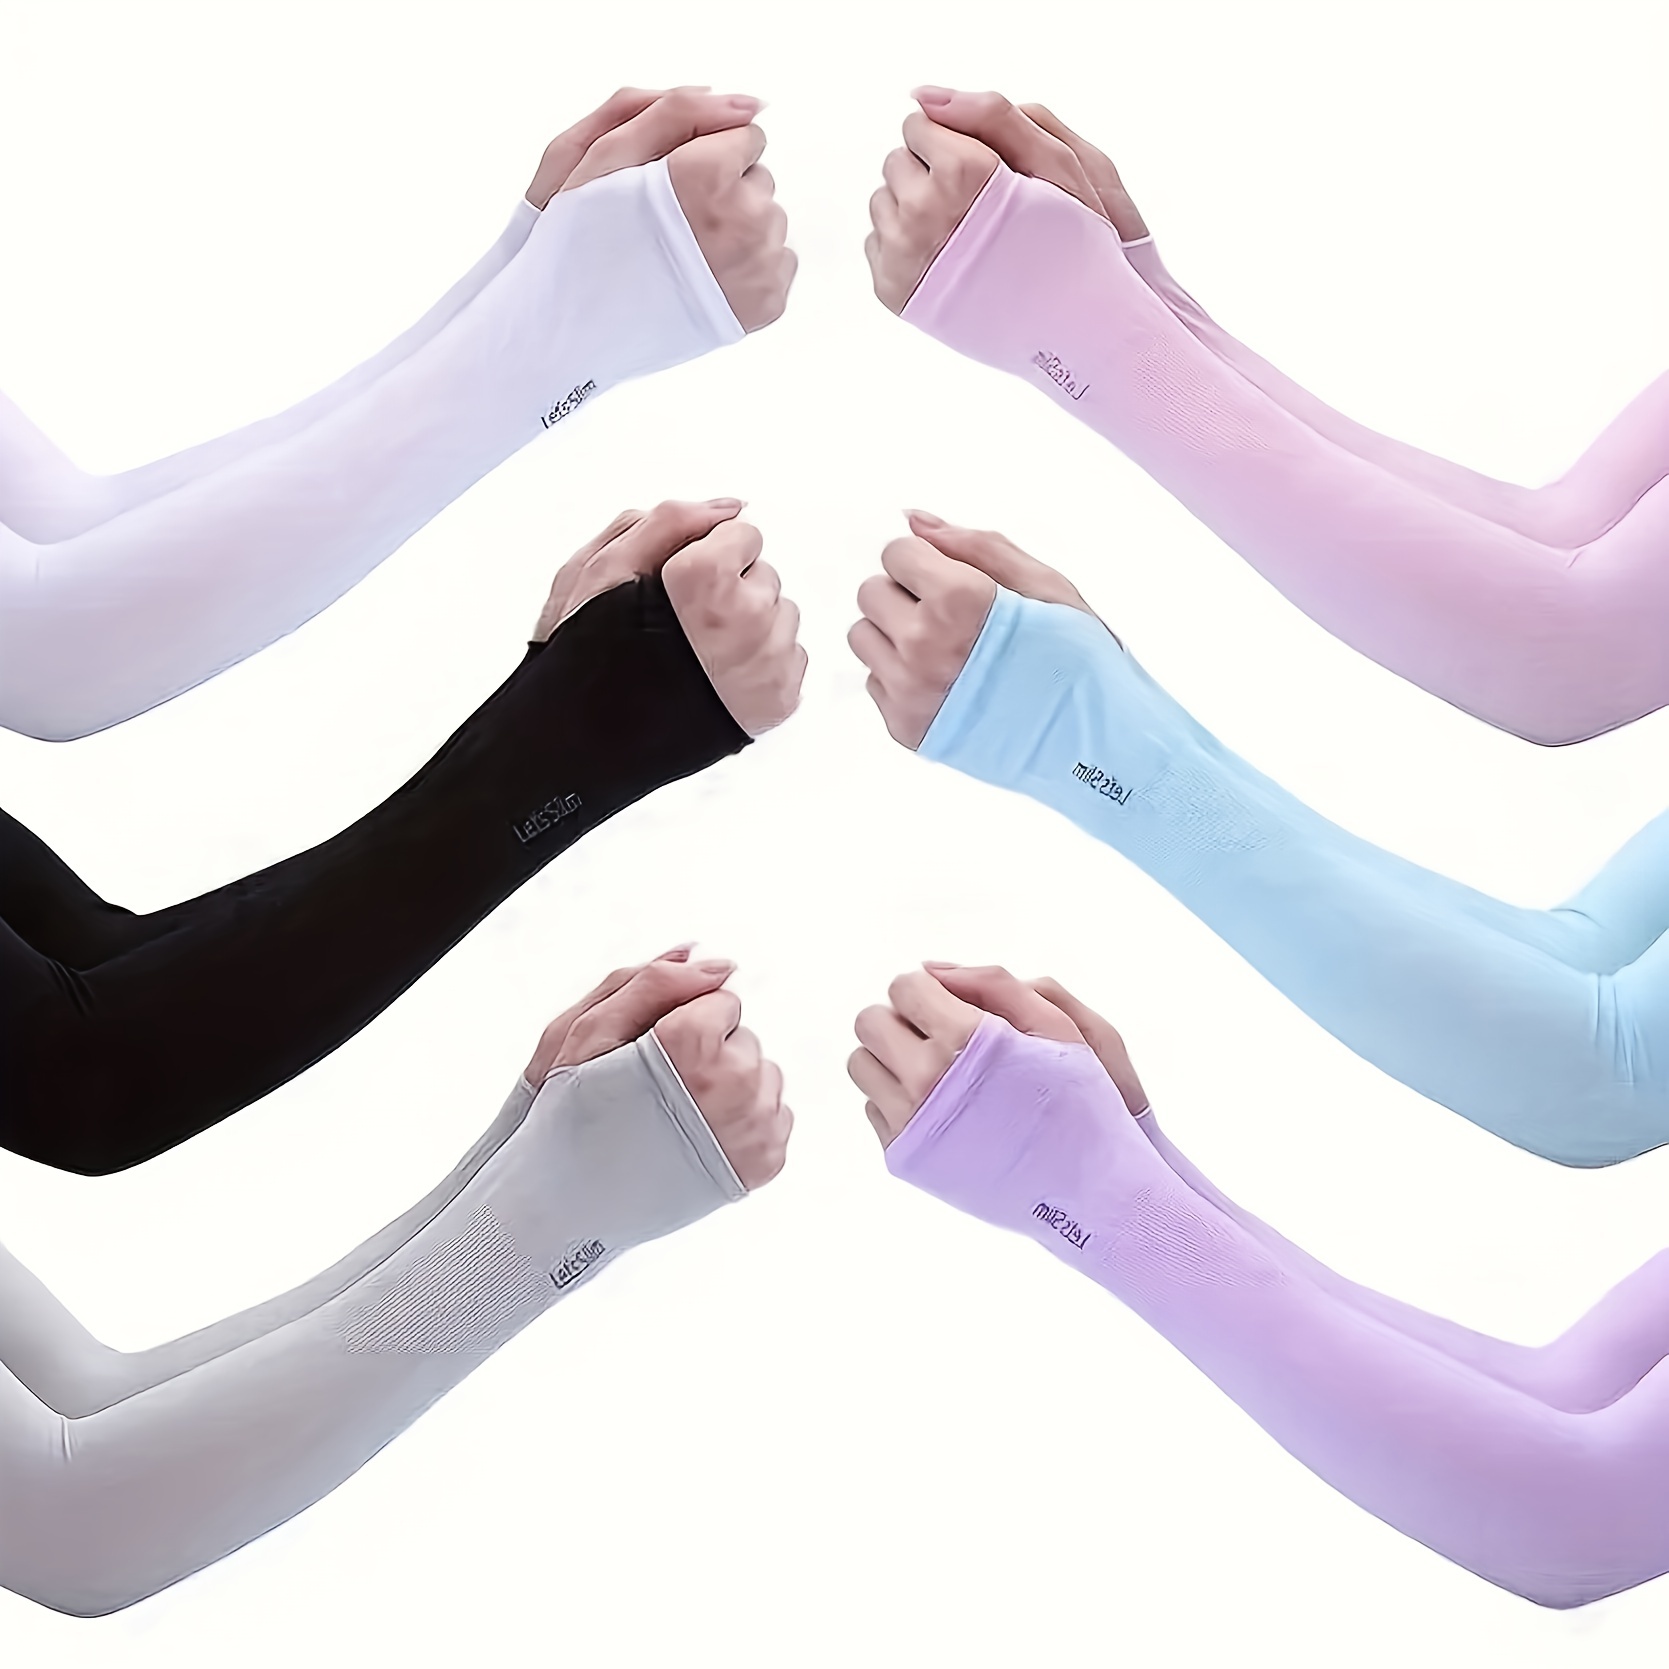 Let's Slim Arm Sleeves with UV Protection for Sports & Driving 1